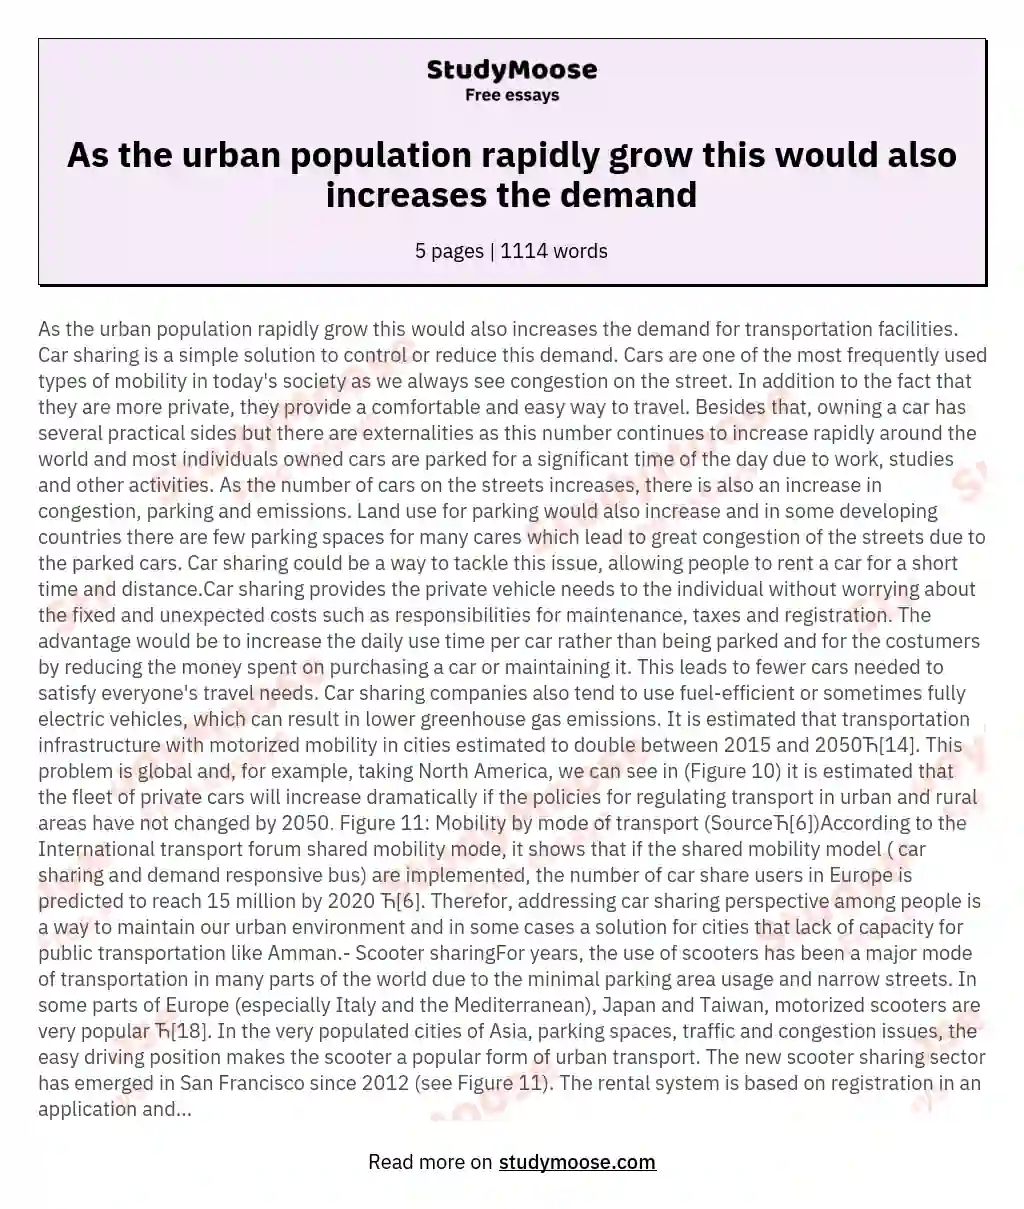 As the urban population rapidly grow this would also increases the demand essay